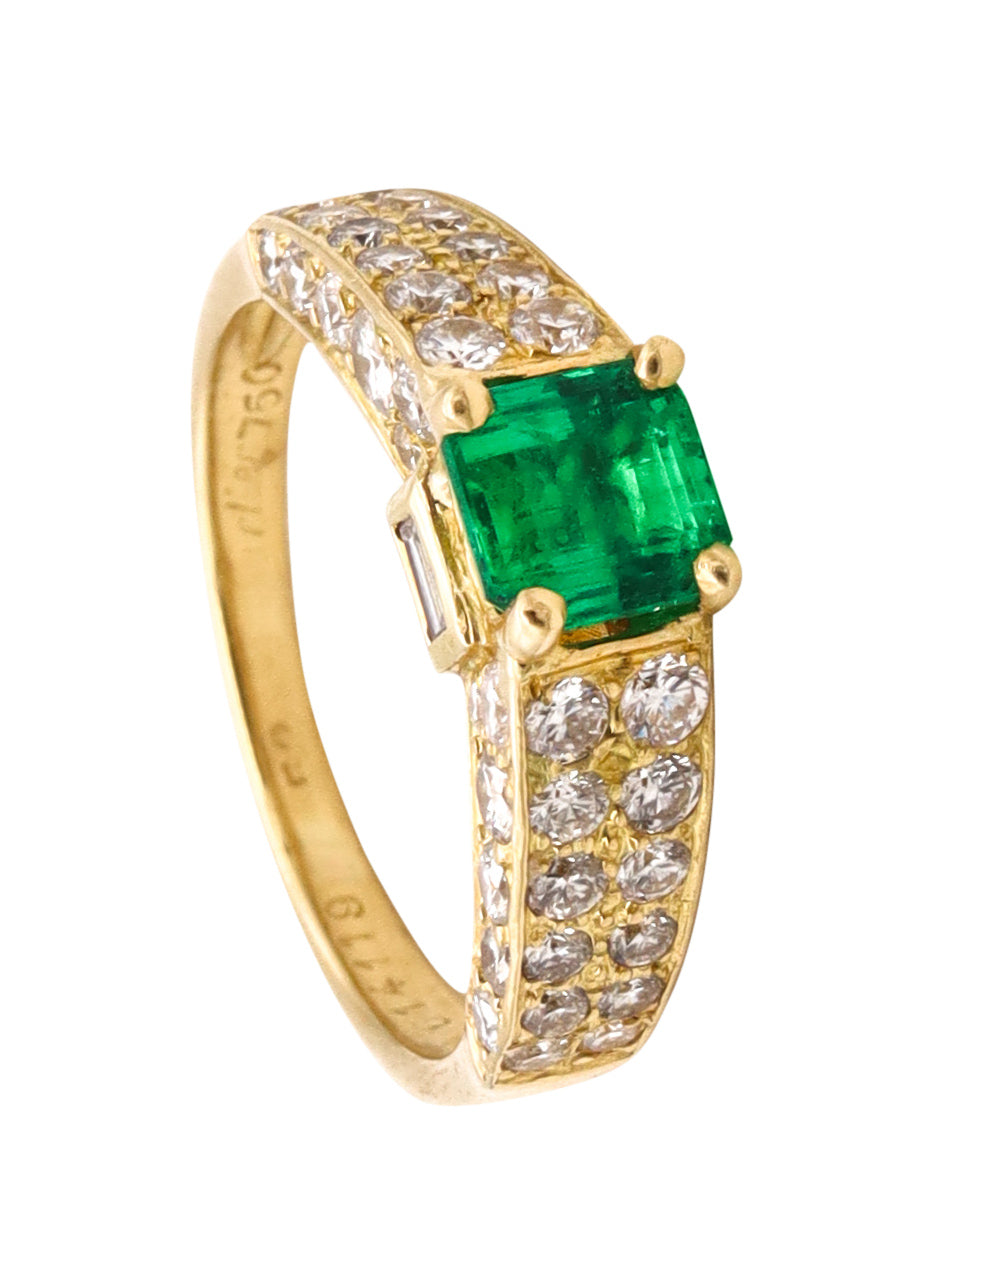 *Cartier Gem set ring in 18 kt yellow gold with 1.67 Cts in diamonds and Colombian Emerald